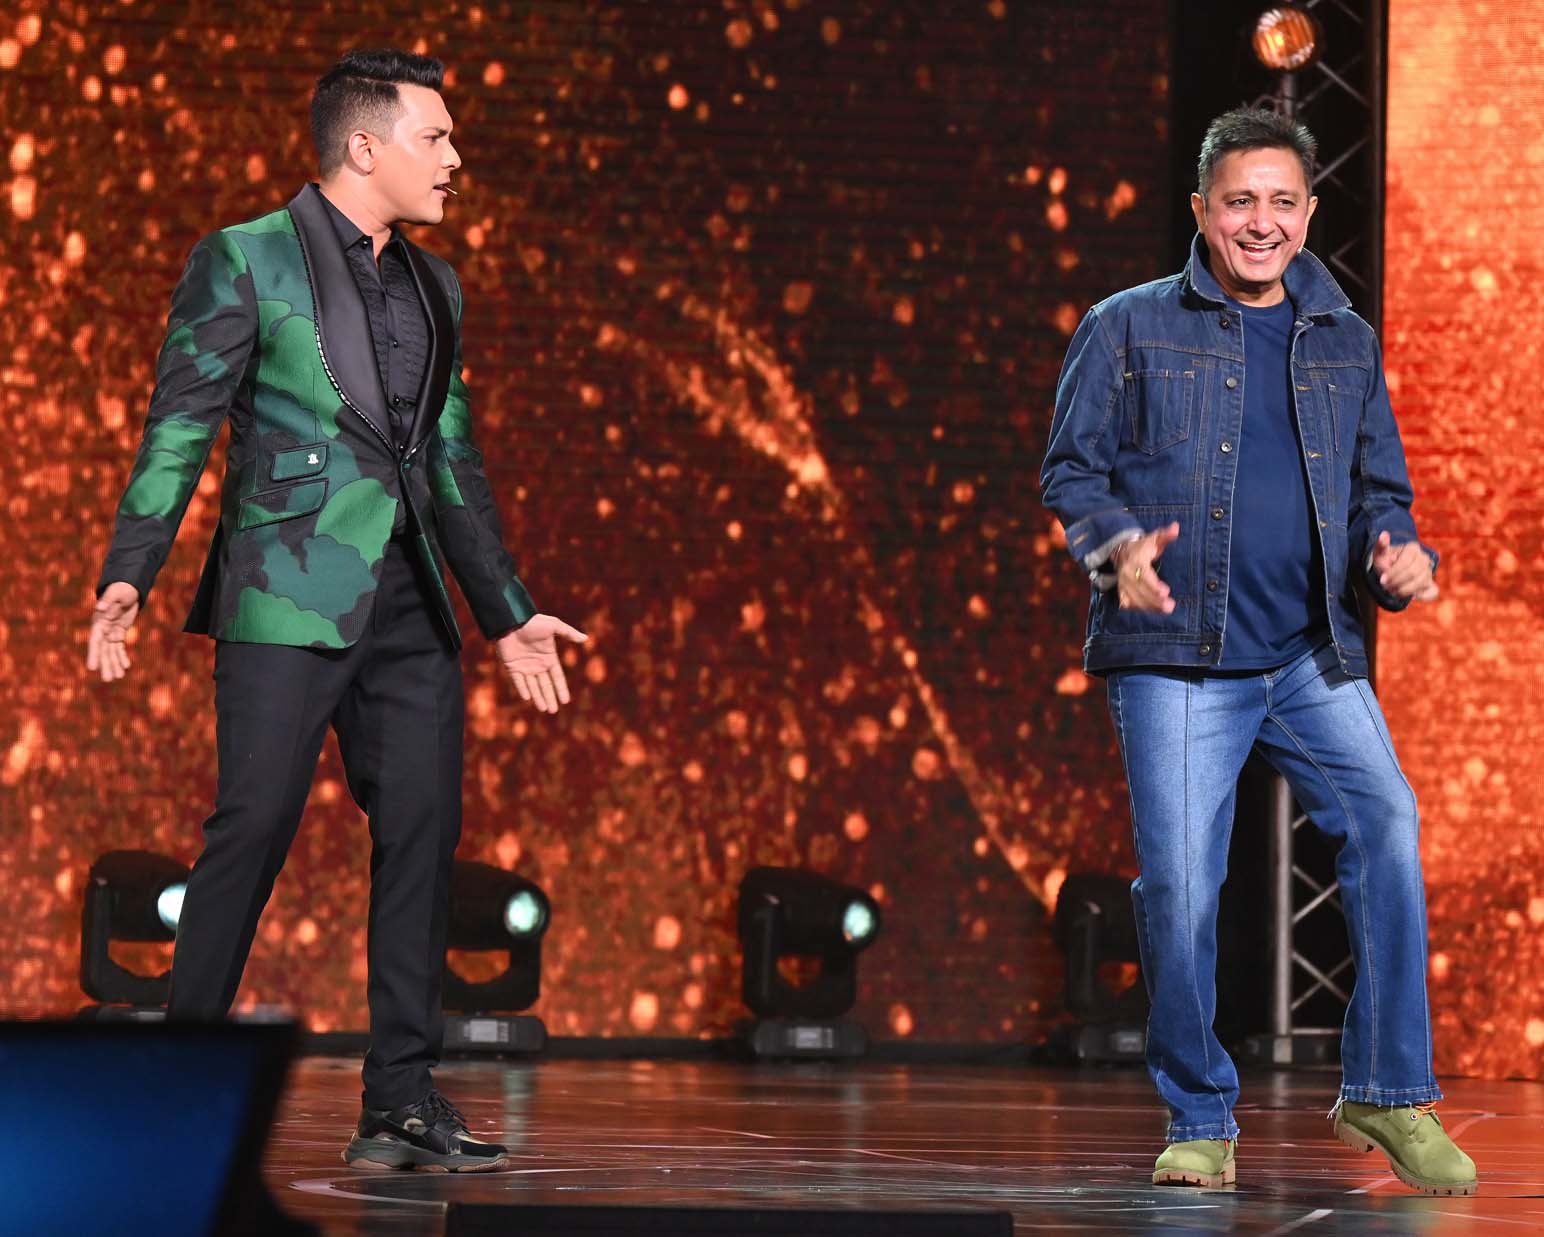 Musical extravaganza on Indian idol as Legendary singer Sukhwinder Singh graces the stage this weekend